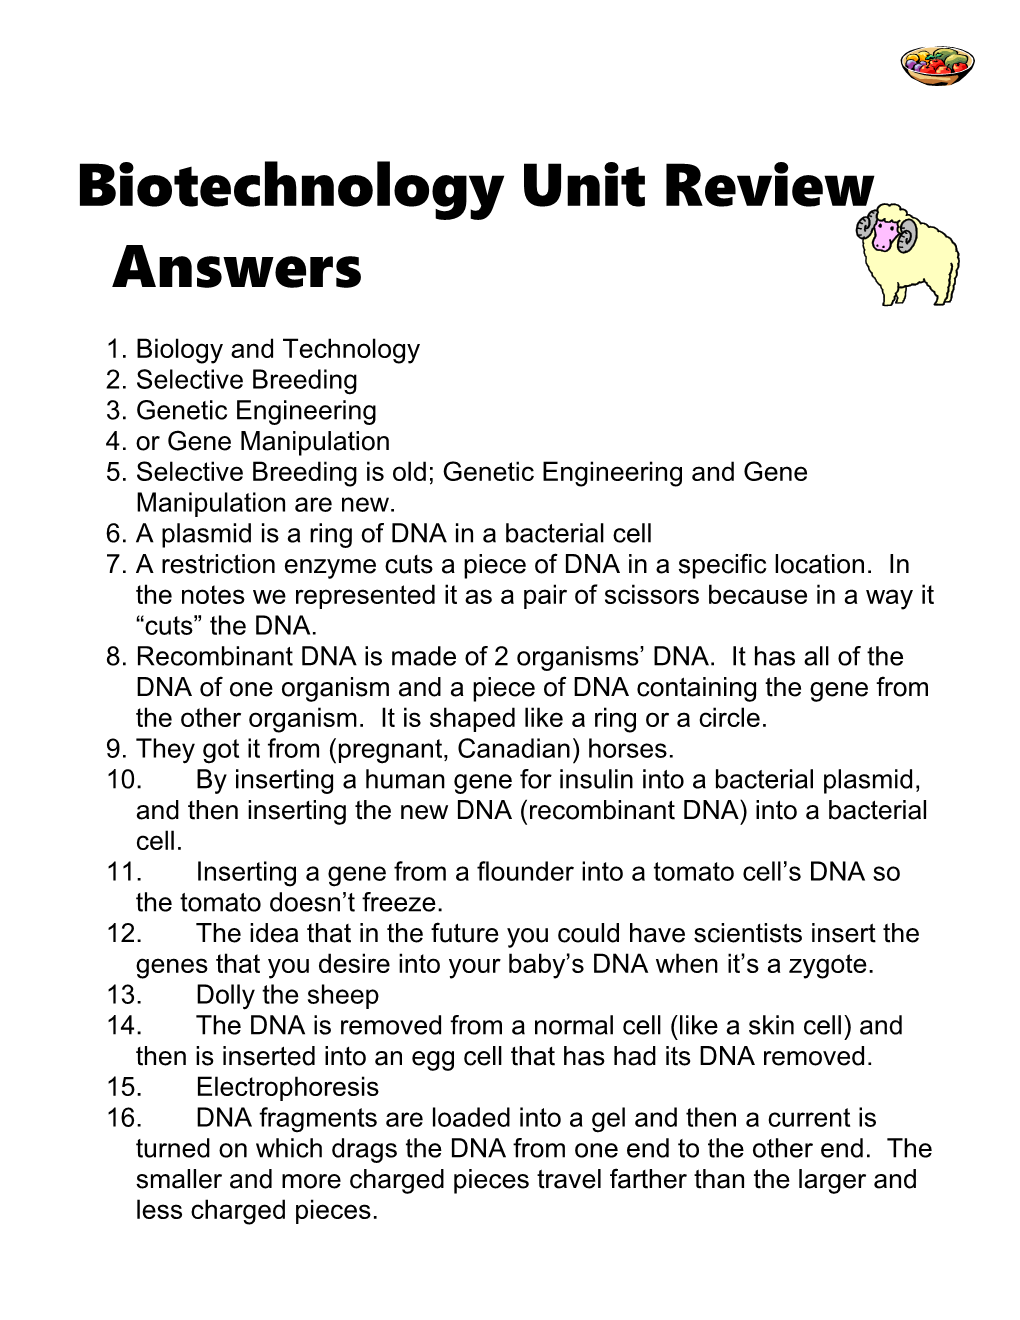 Biotechnology Unit Review Answers